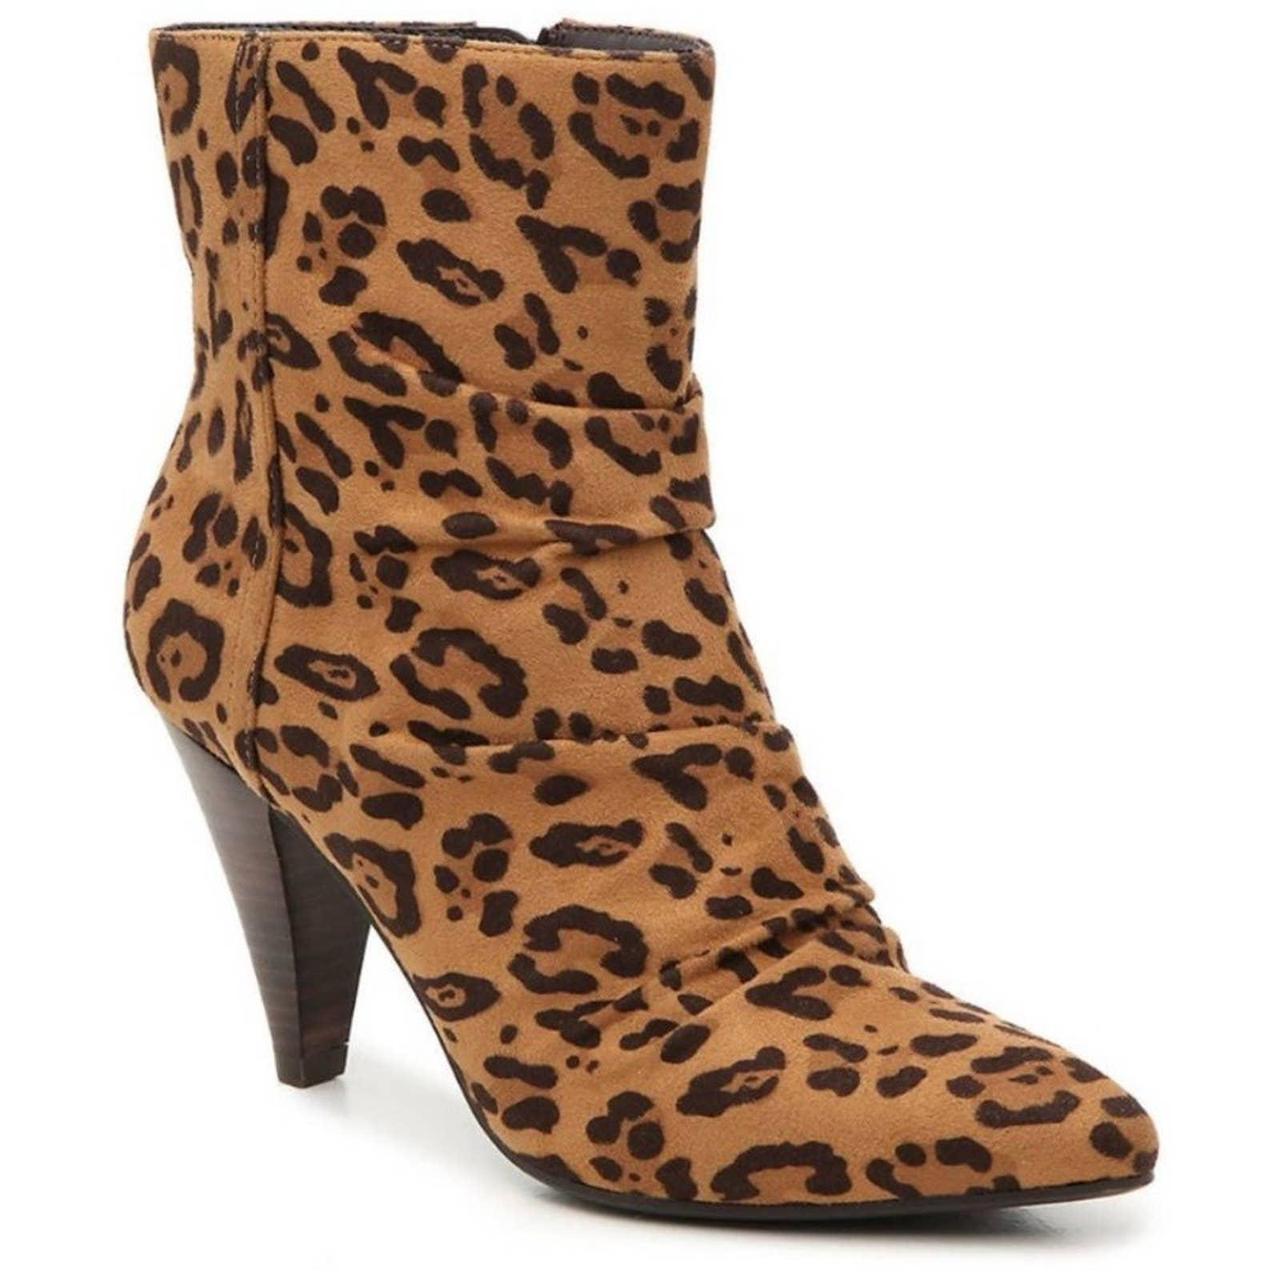 Product Image 1 - Impo Leopard Print Ankle Booties,Faux